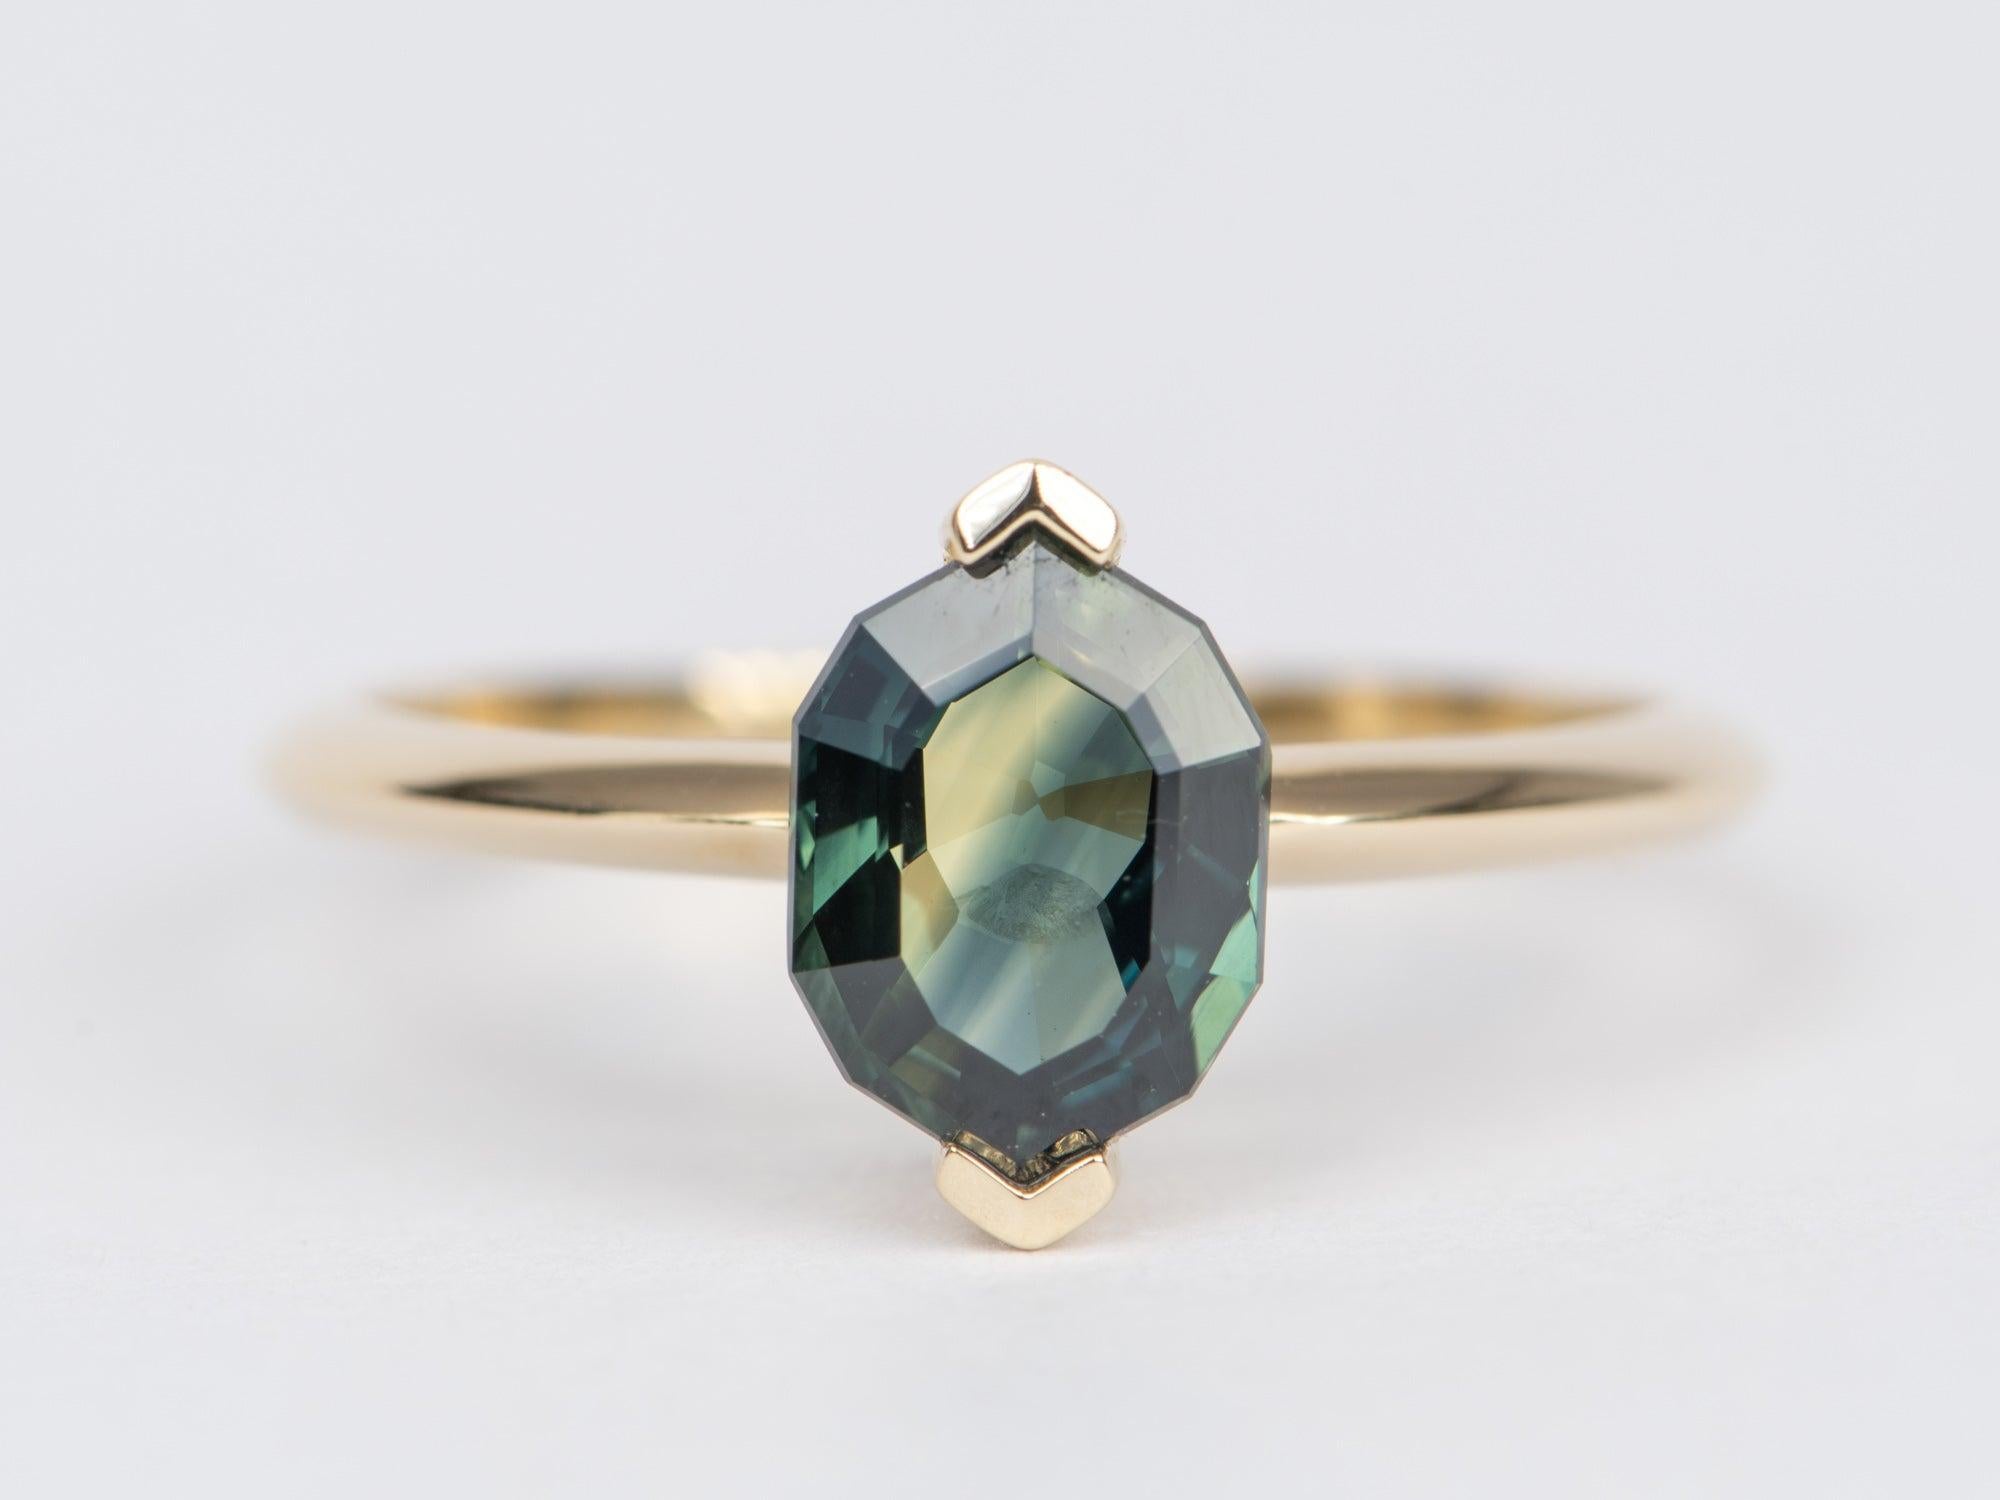 ♥ Solid 14k yellow gold ring set with a beautiful solitaire Parti Sapphire
♥ Gorgeous blue green color!
♥ The item measures 10mm in length, 6mm in width, and stands 4.9mm from the finger

♥ US Size 7 (Free resizing up or down 1 size)
♥ Band width: